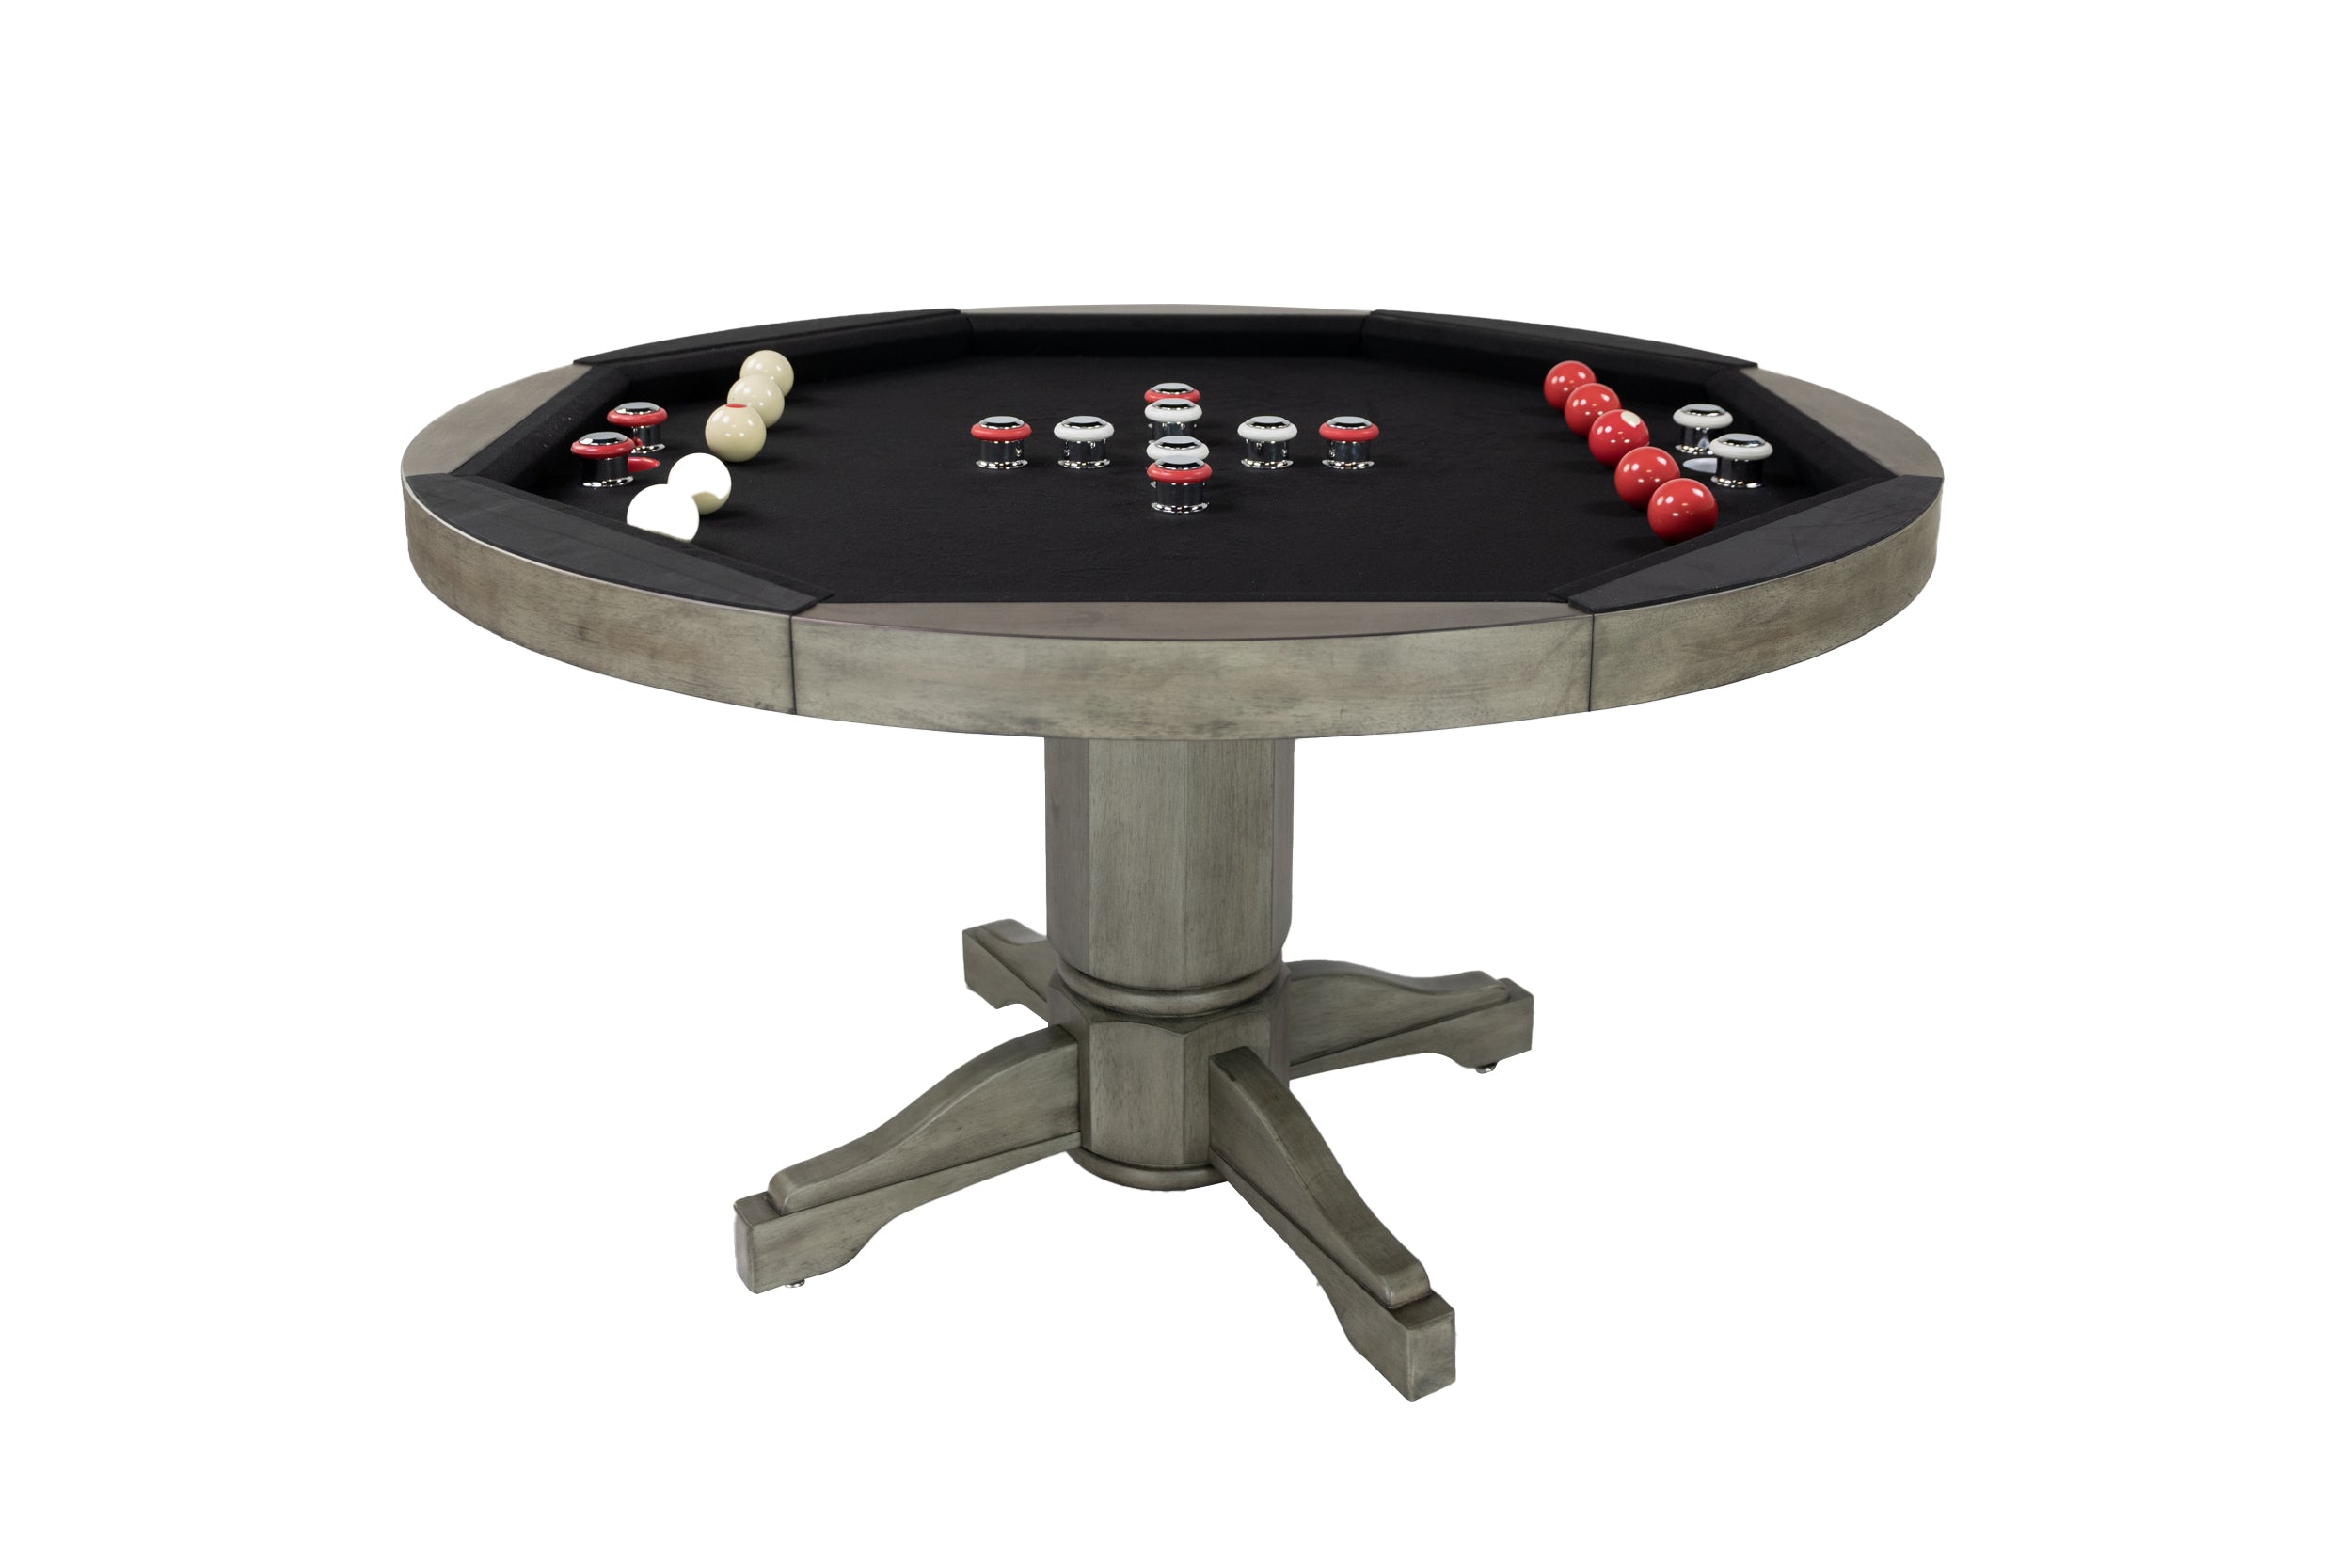 Legacy Billiards Heritage 3 in 1 Game Table with Poker, Dining and Bumper Pool in Overcast Finish - Bumper Pool Table with Pool Balls